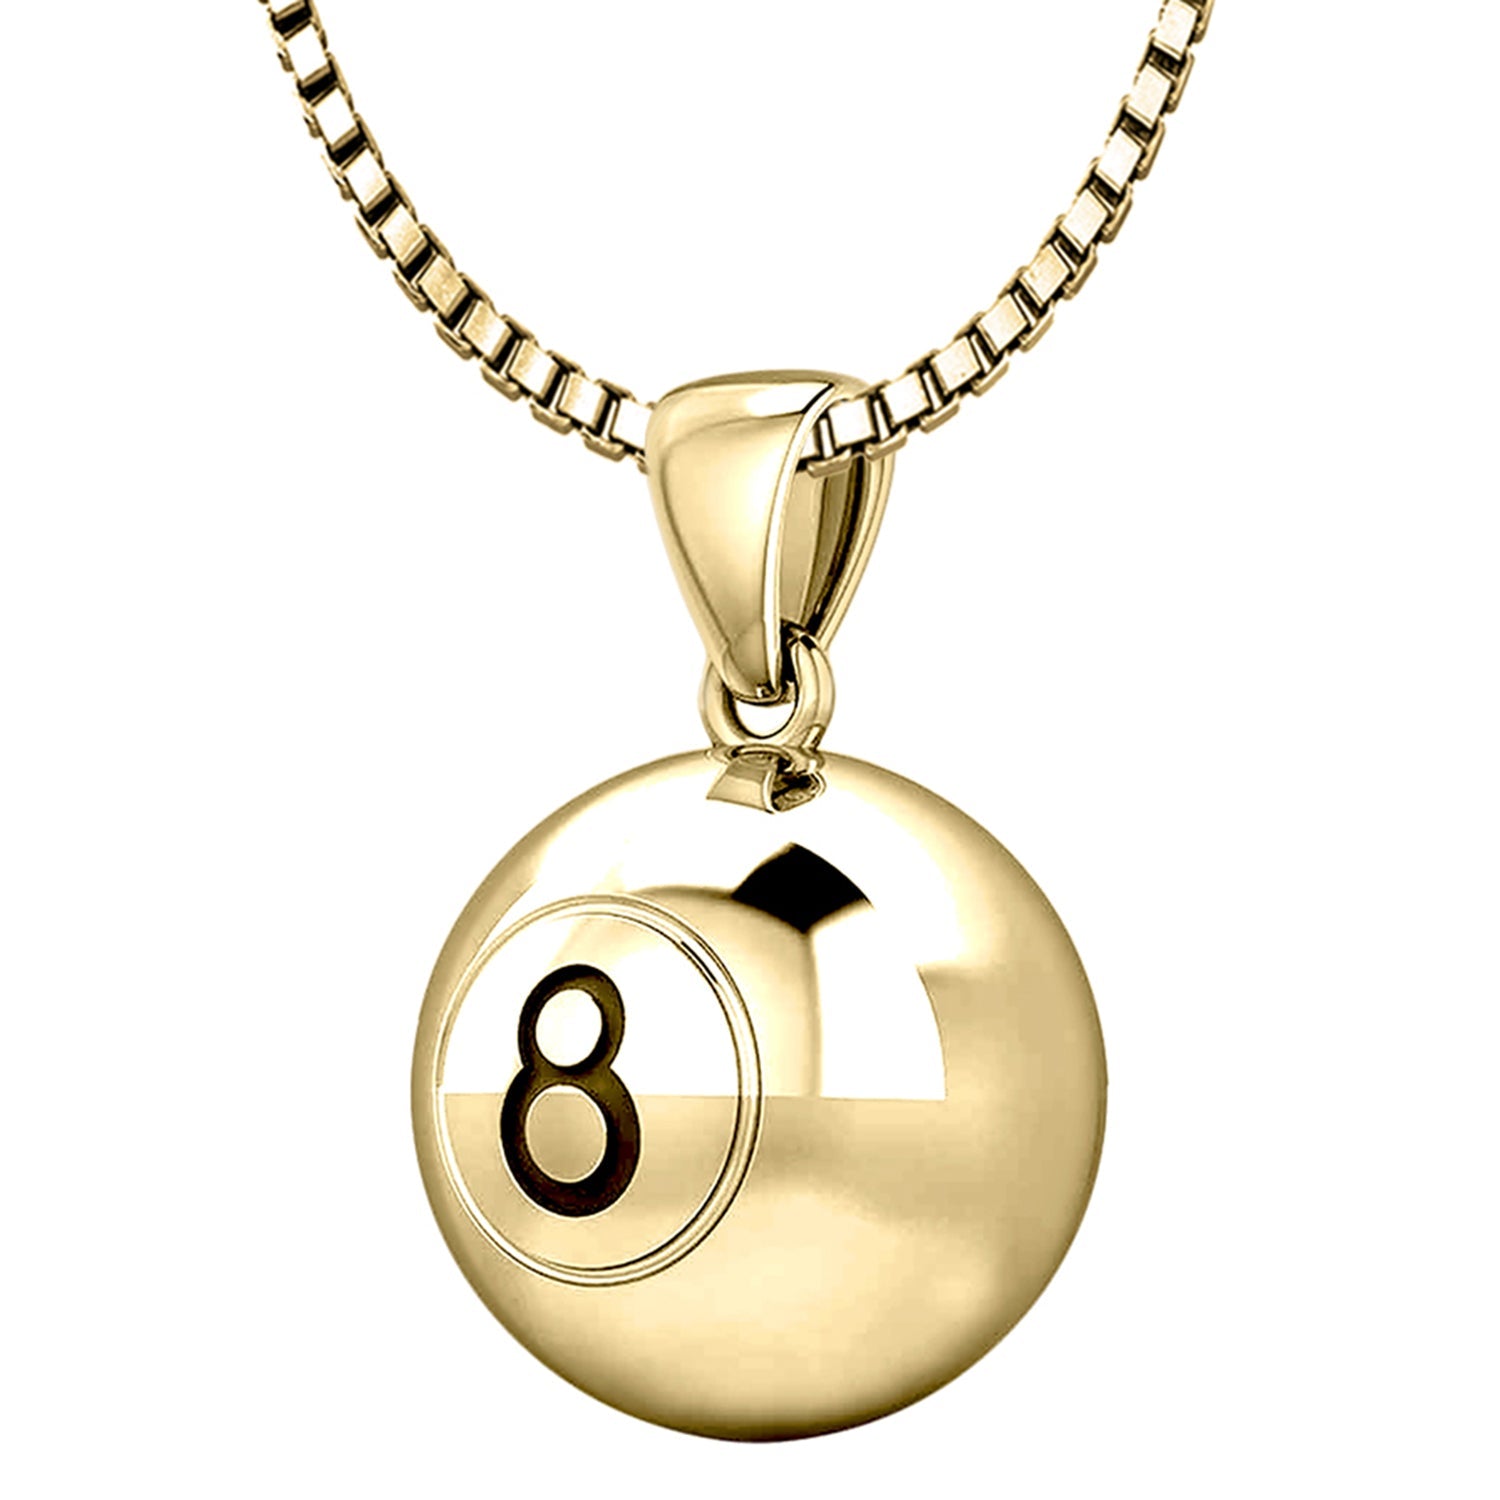 Small 10K or 14K Yellow Gold 3D Eight 8 Ball Billiards Pendant Necklace,  13mm - 10k Yellow Gold / 18in, 1mm Box Chain